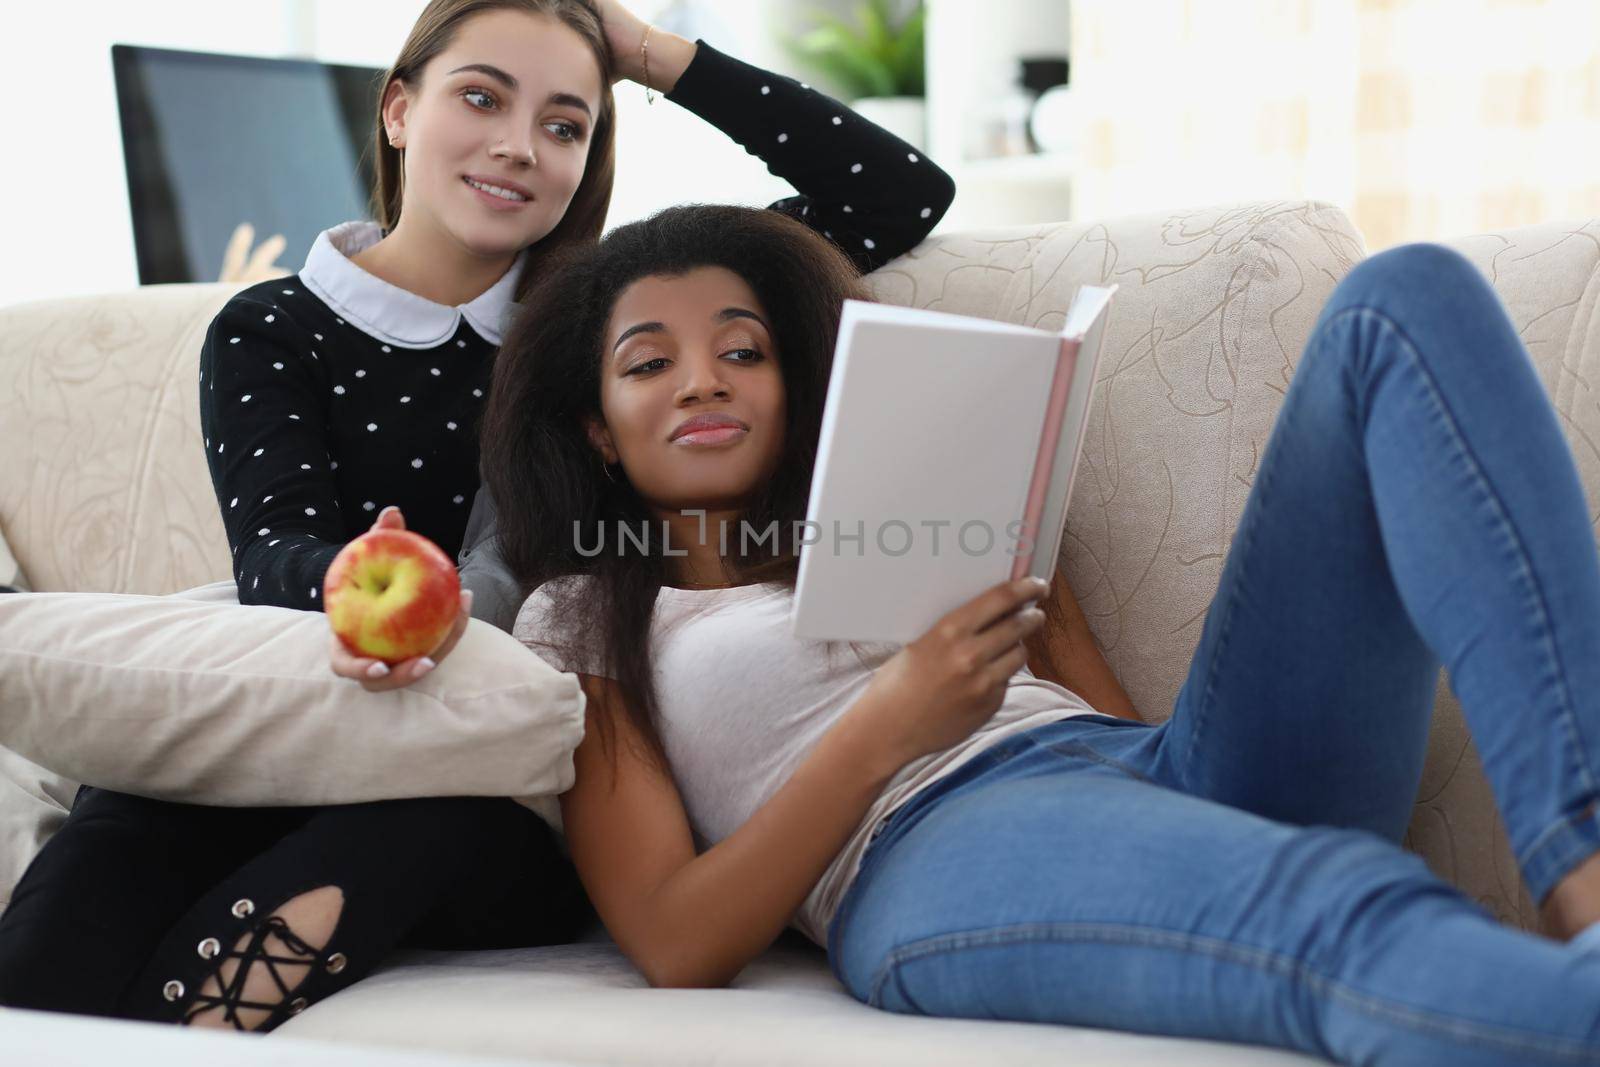 Portrait of best friends reading book chilling on sofa, apple for snack, relaxing atmosphere. Expand knowledge in literature. Leisure, friendship concept